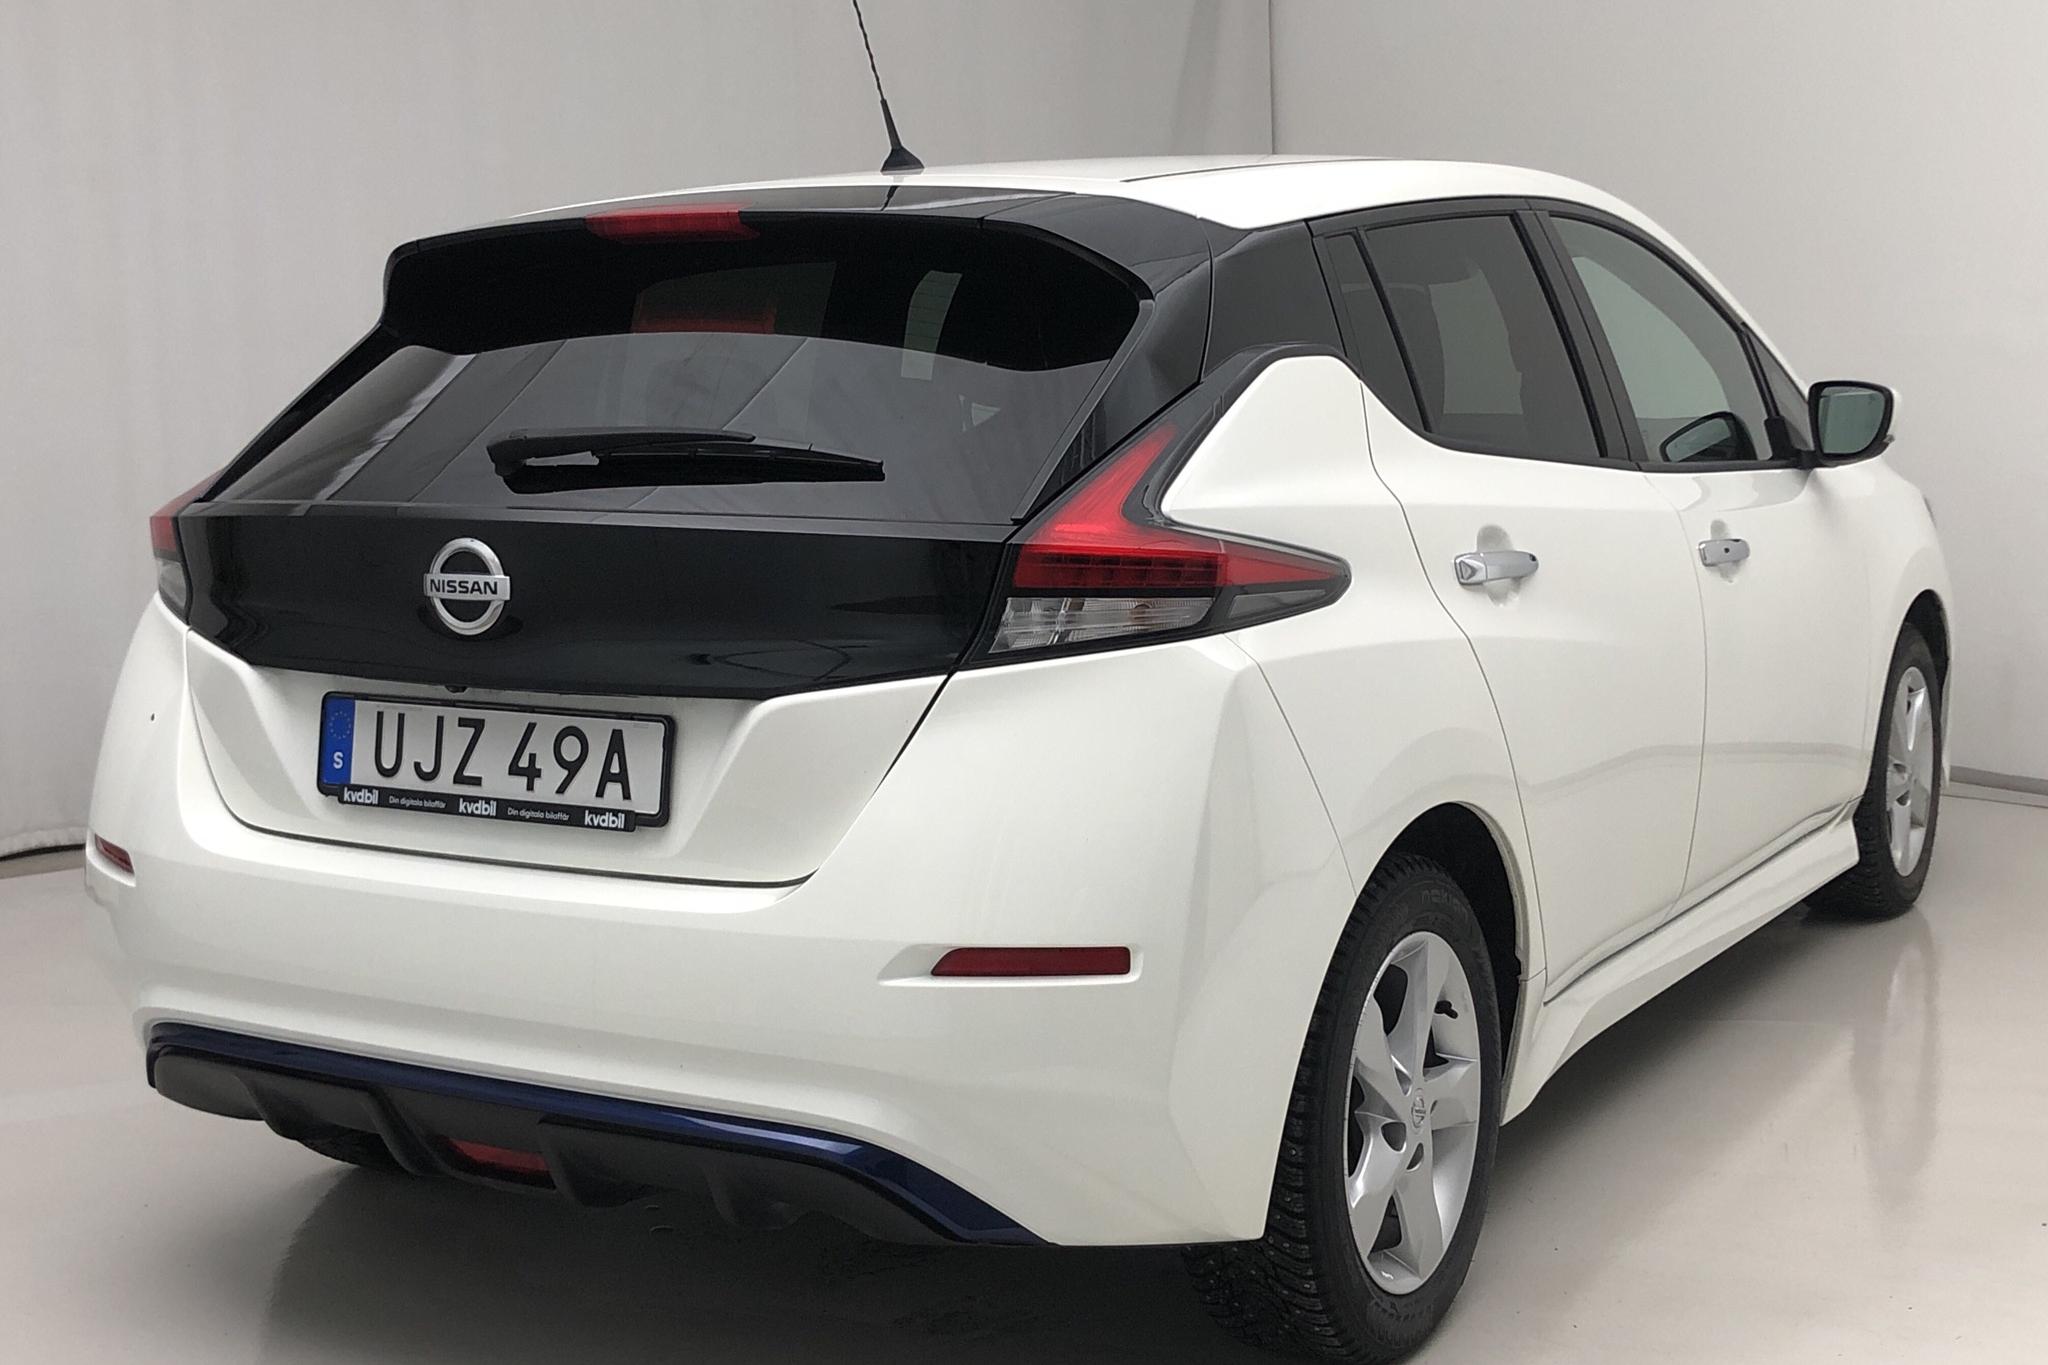 Nissan LEAF 5dr 39 kWh (150hk) - 20 380 km - Automatic - white - 2020